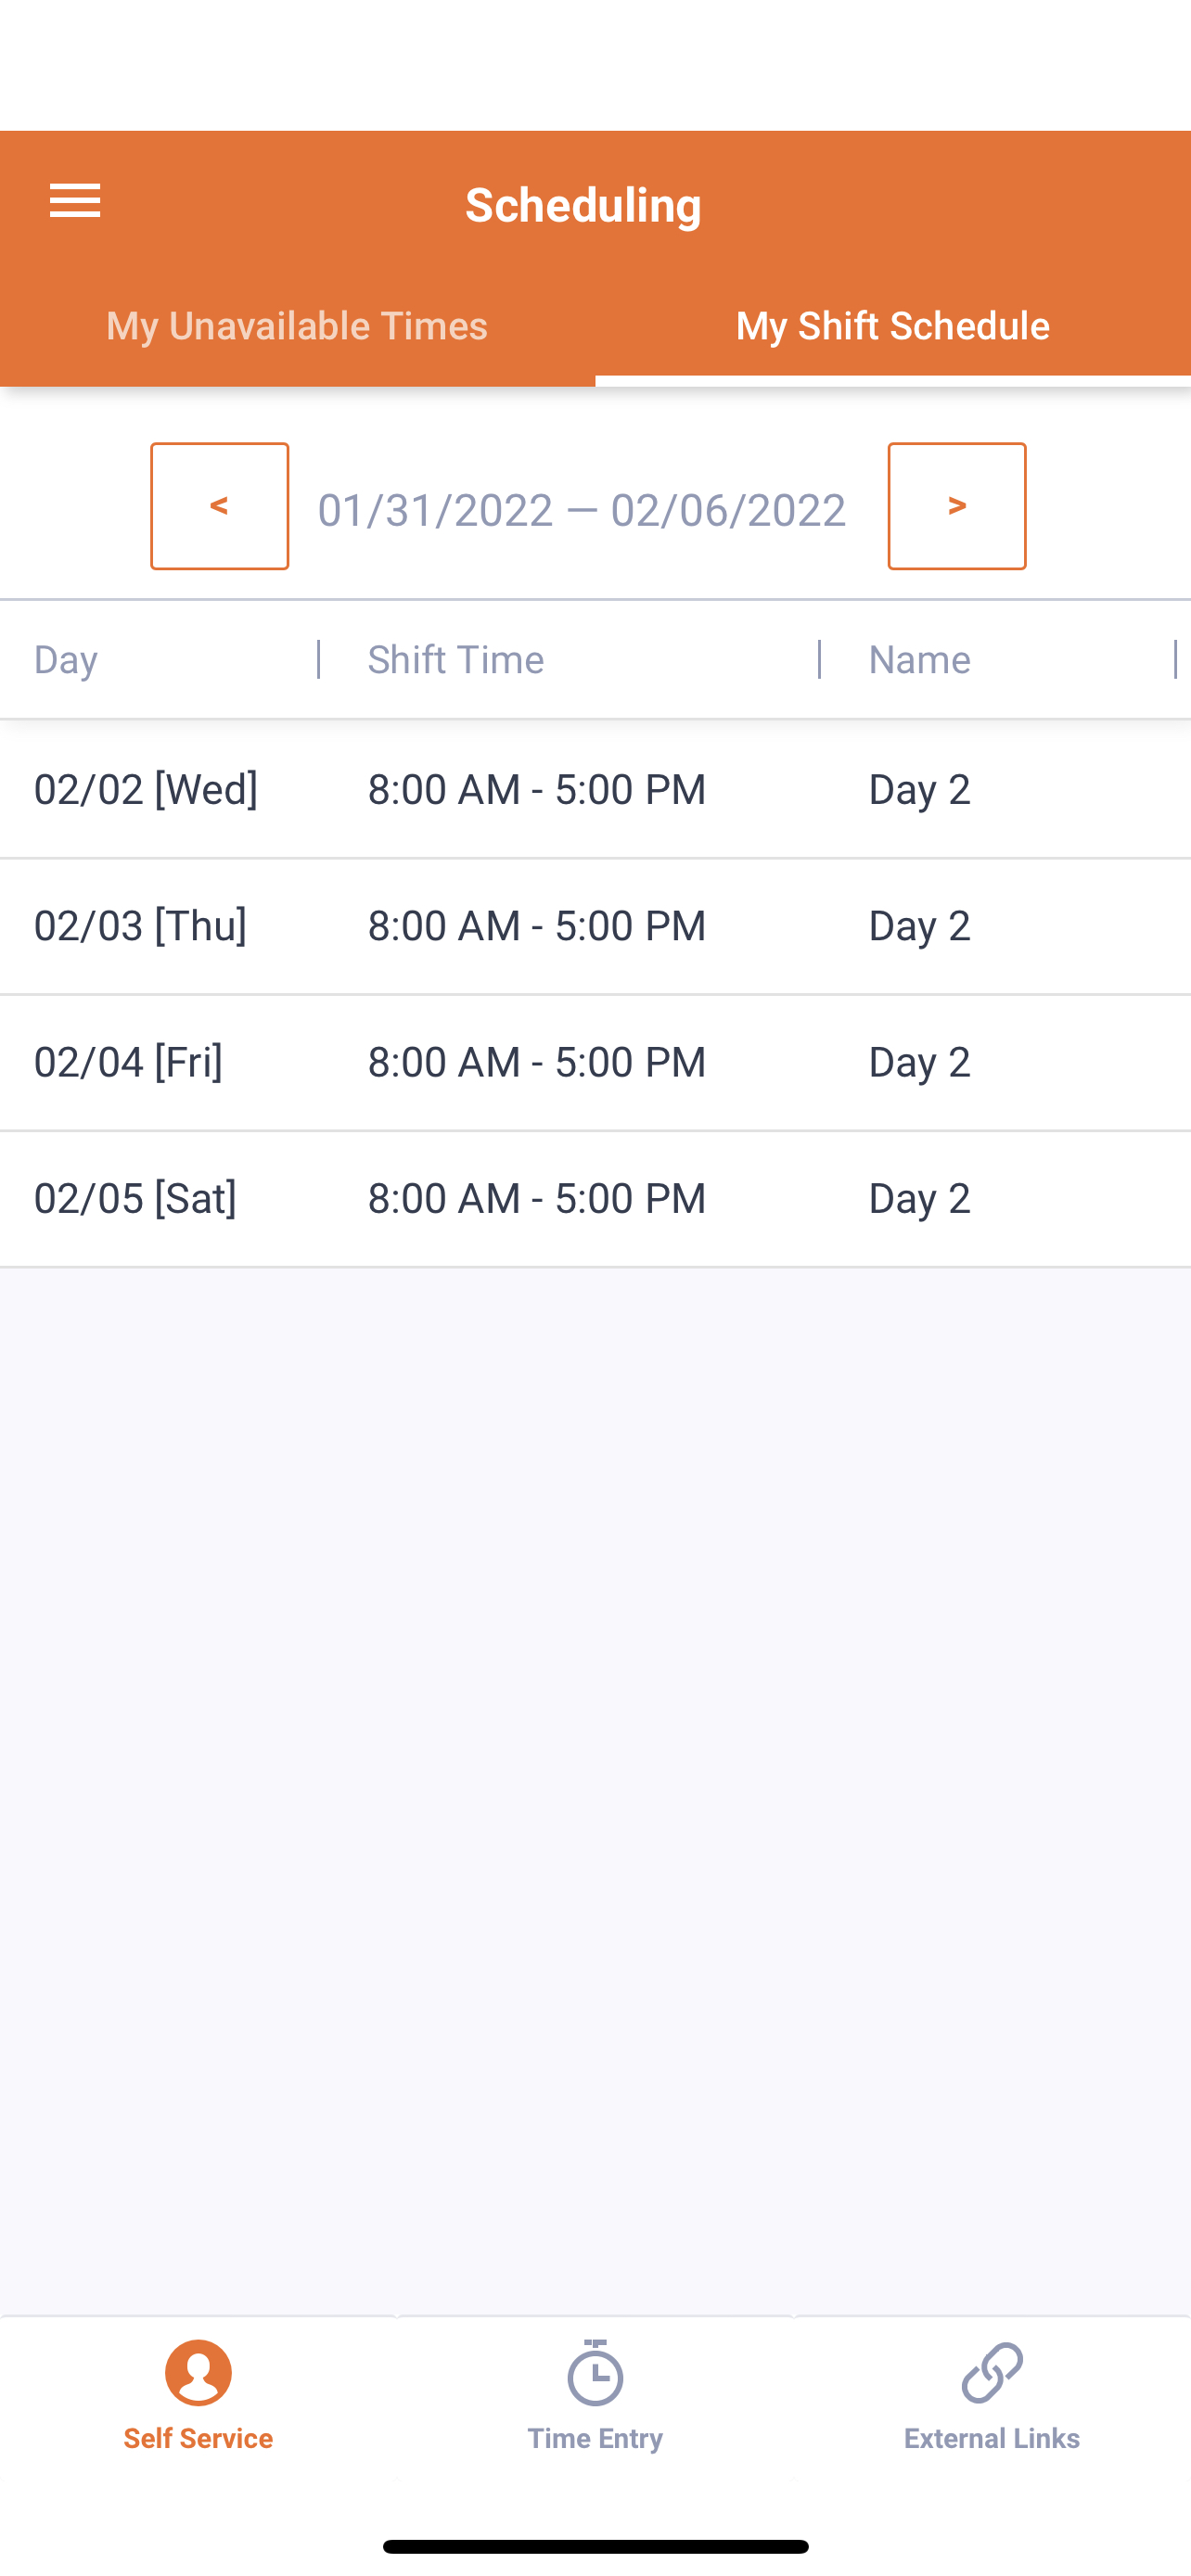 Scheduling on mobile app